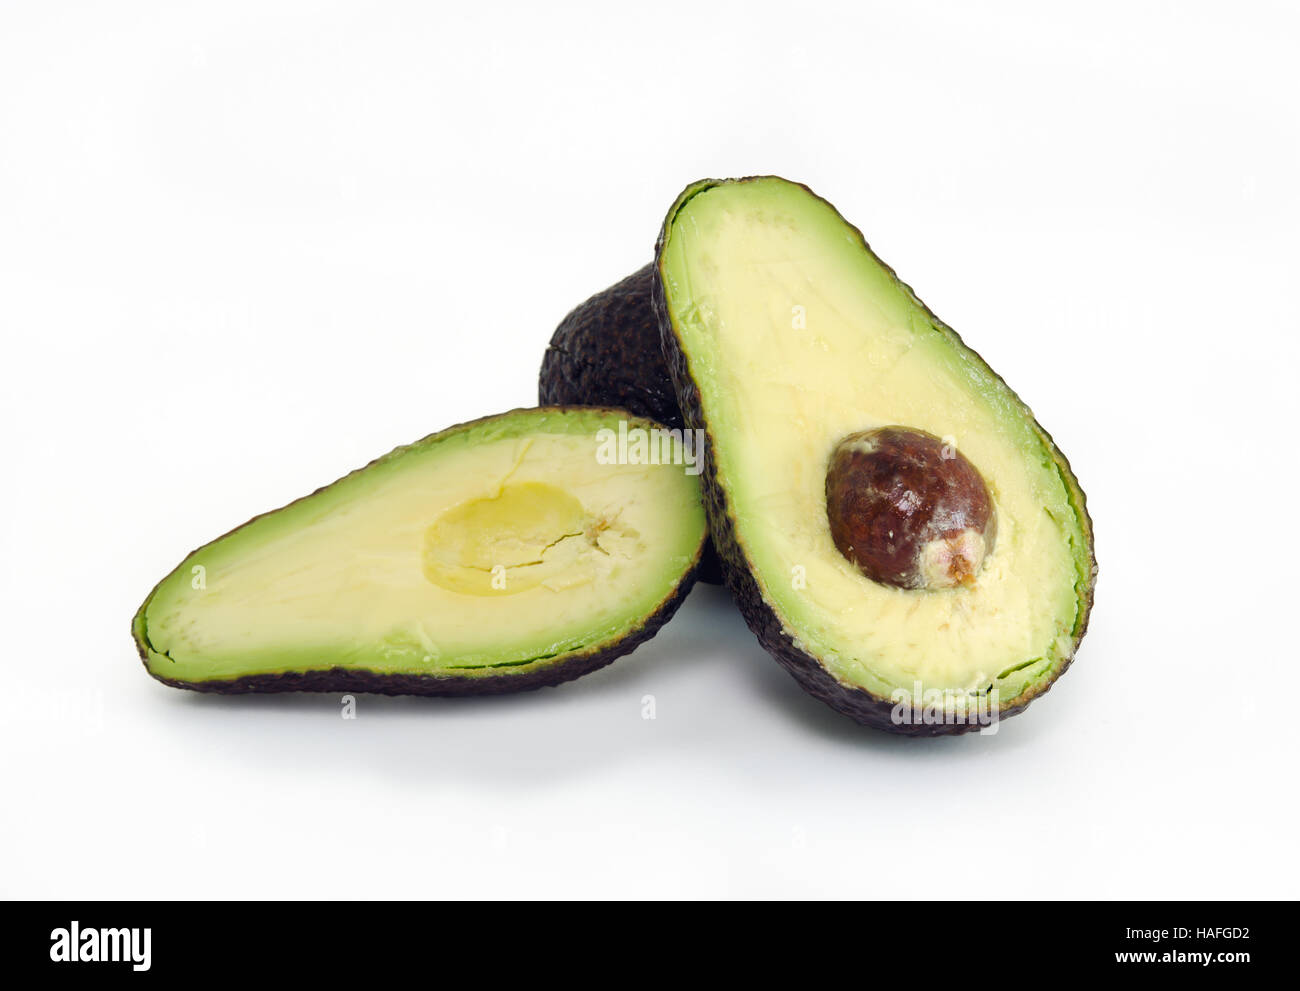 Avocado (also named as Persea americana, Lauraceae avocado, alligator pear, criollo fruit, Aguacate in Spanish, Abacate in Protugese, or avocado pear) Stock Photo